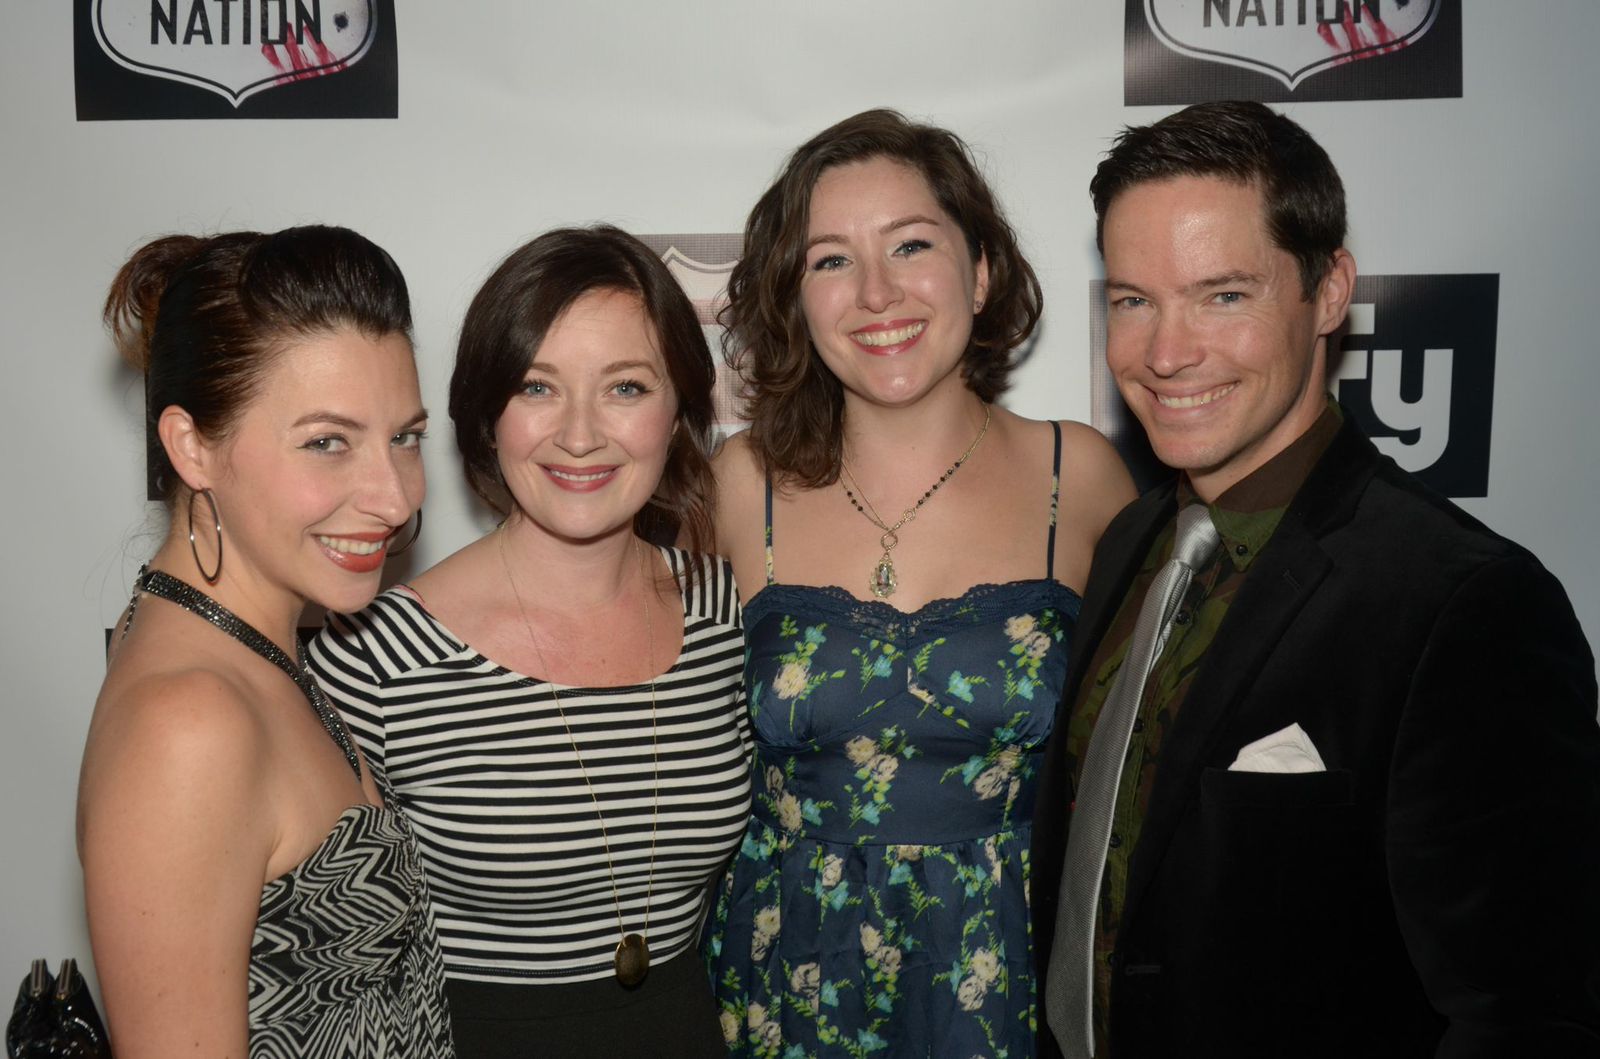 Angela DiMarco, Lisa Coronado (Dr. Merch), Wonder Russell, and David S. Hogan (Brother Eli) at the Z Nation Premiere Party.